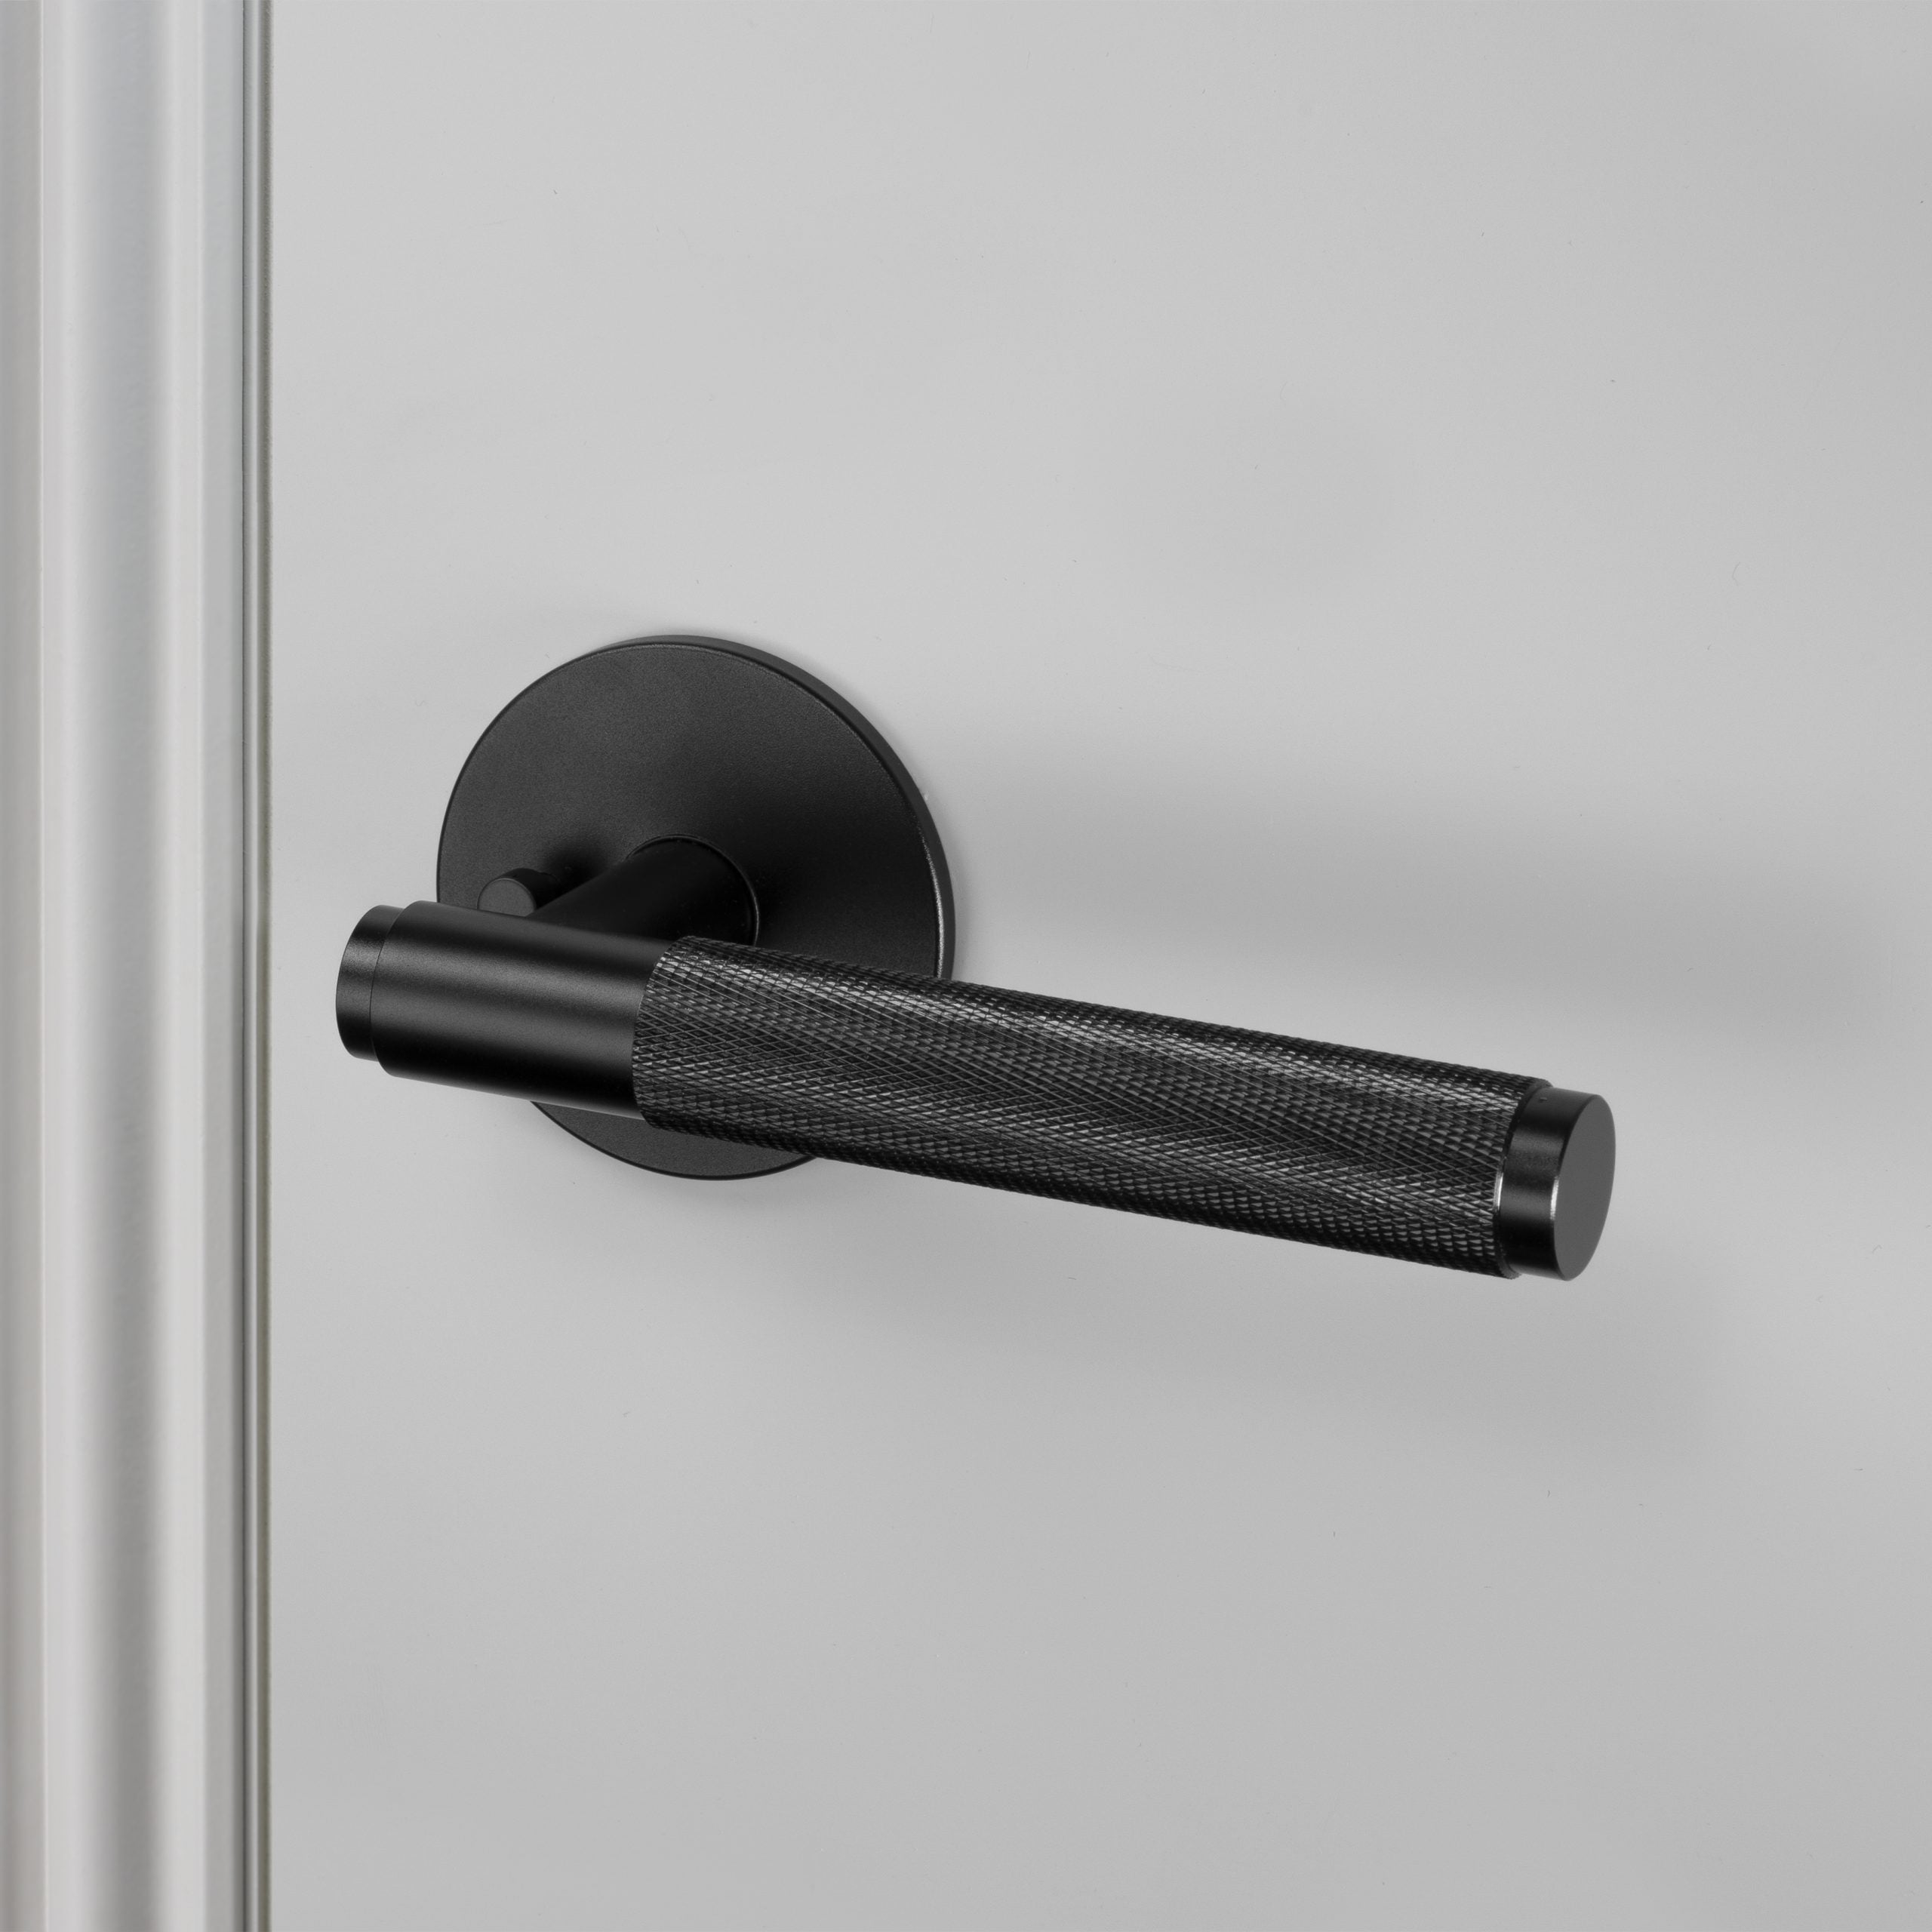 Buster + Punch Conventional Door Handle, Cross Design - FIXED TYPE Hardware Buster + Punch Black  